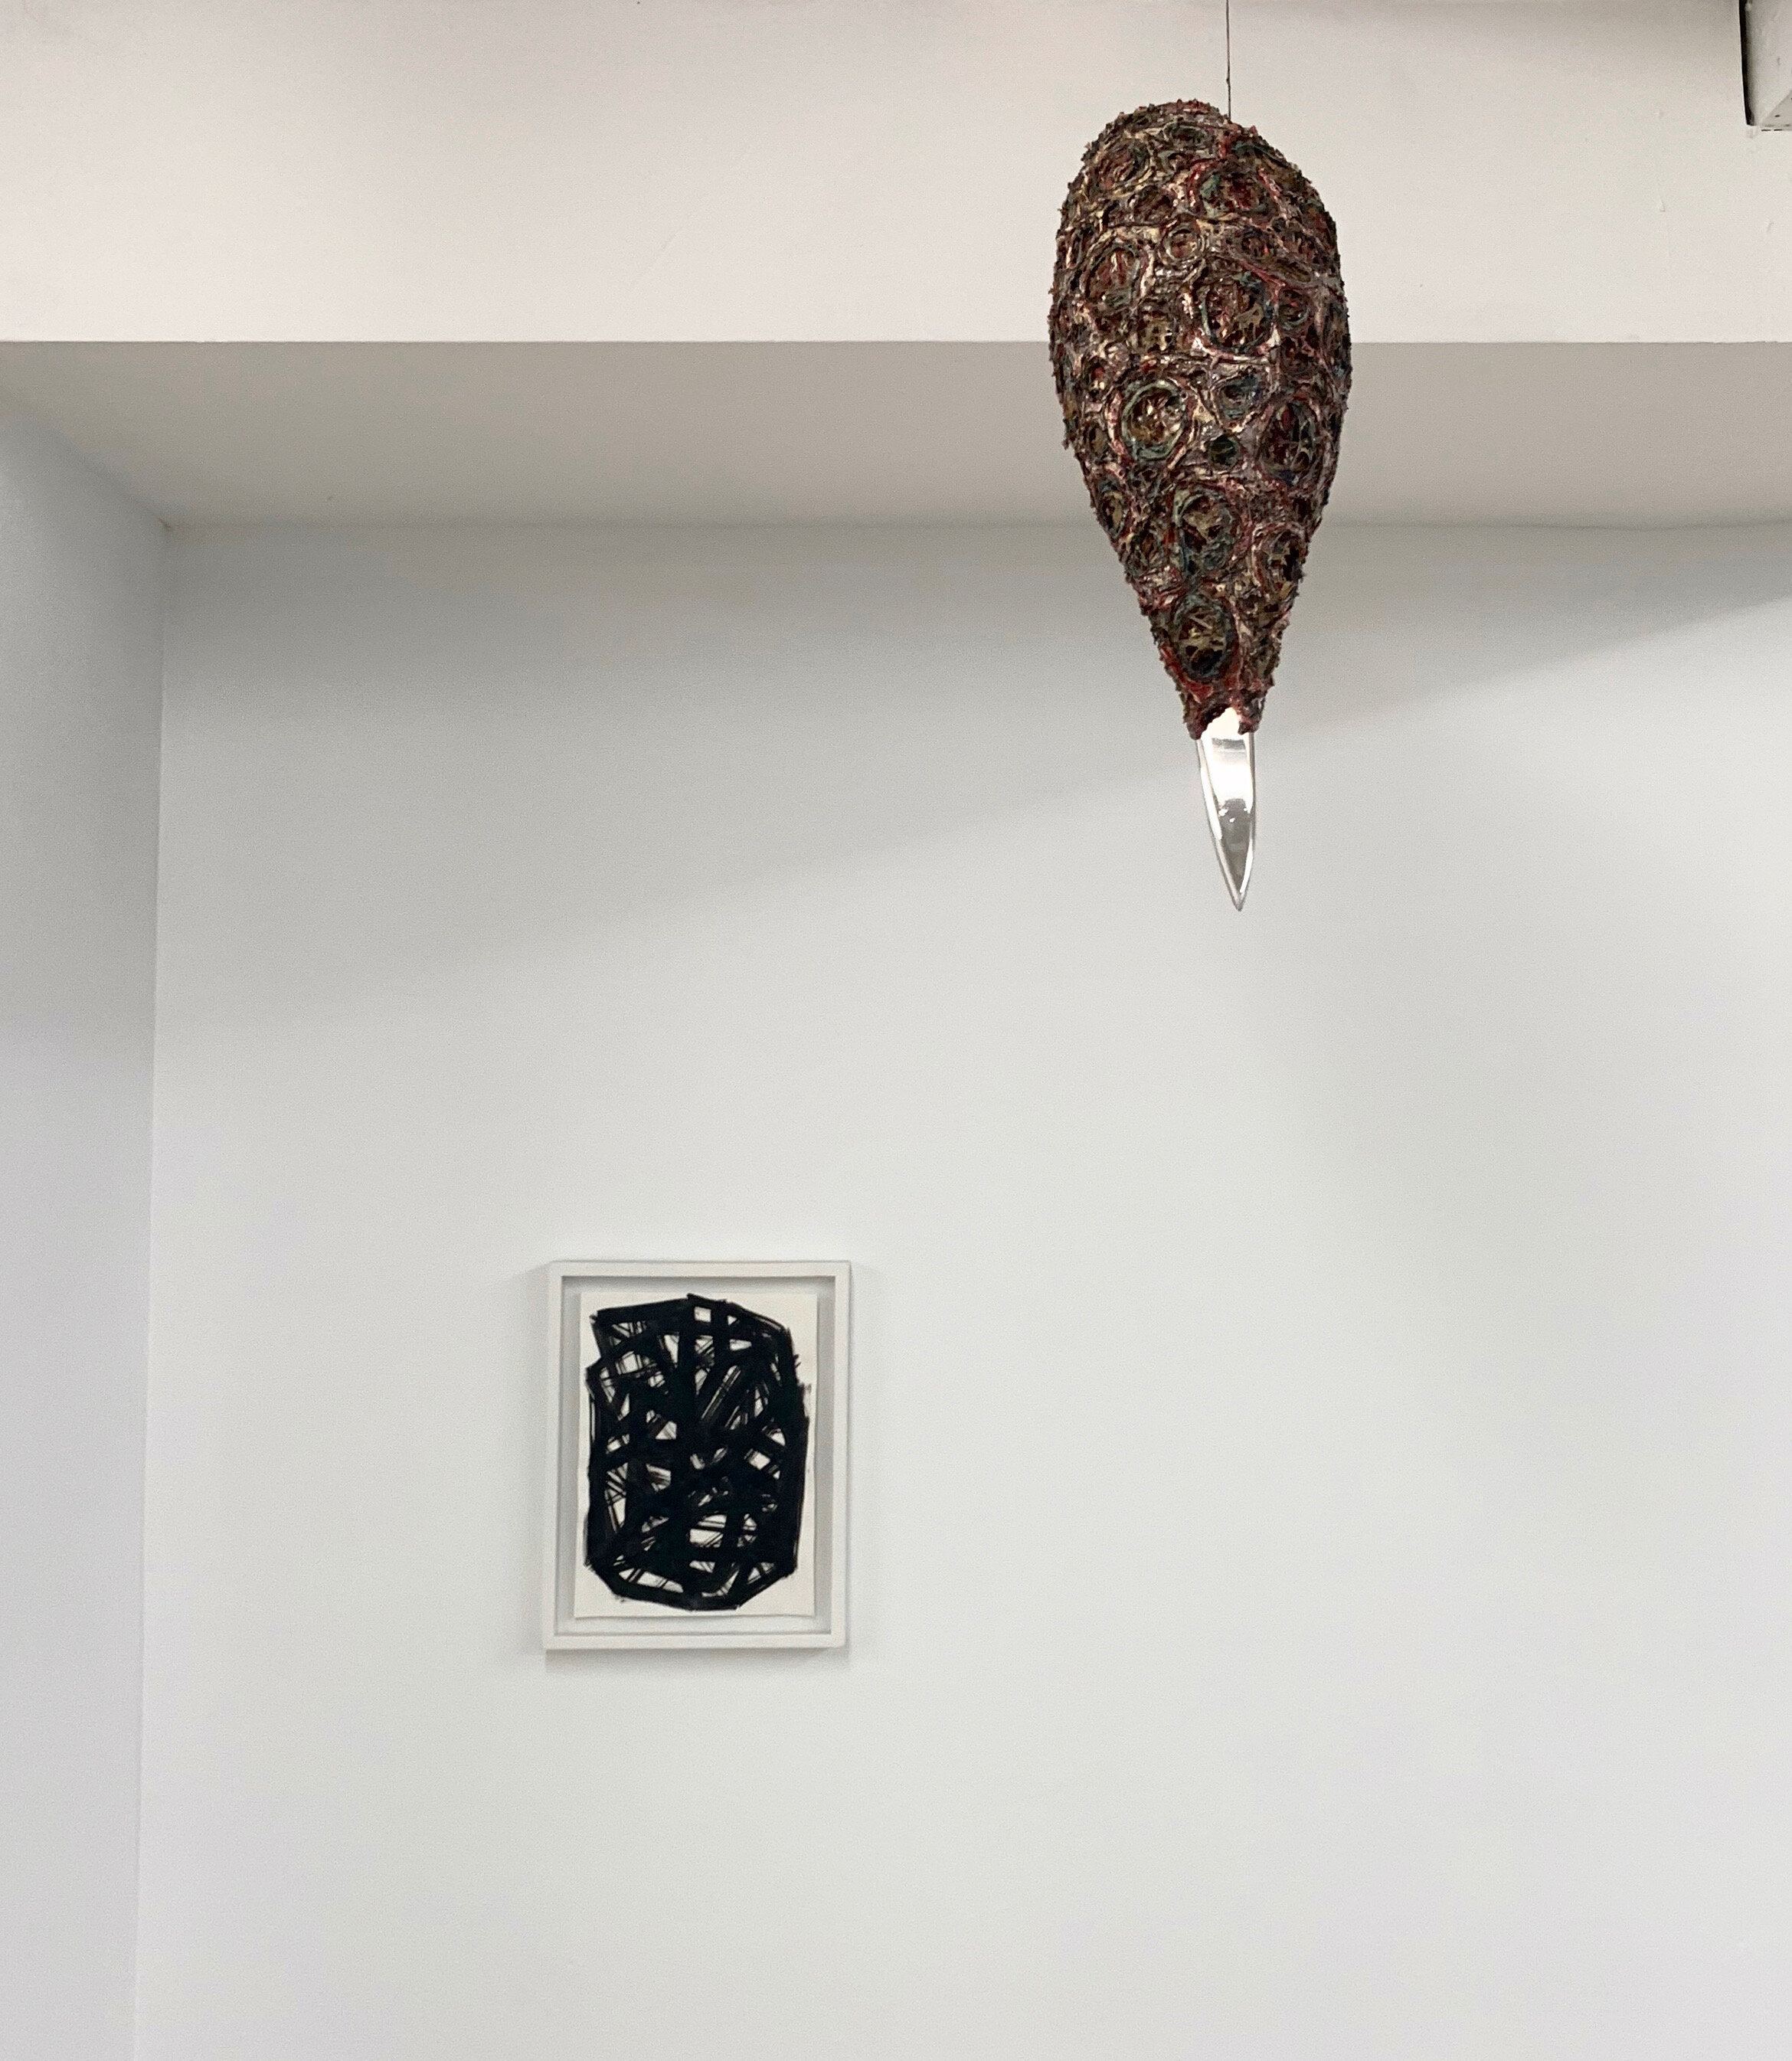 Gereon Krebber hanging sculpture, Charles Dunn Drawing, installation images, None Sing exhibition at Cindy Rucker Gallery